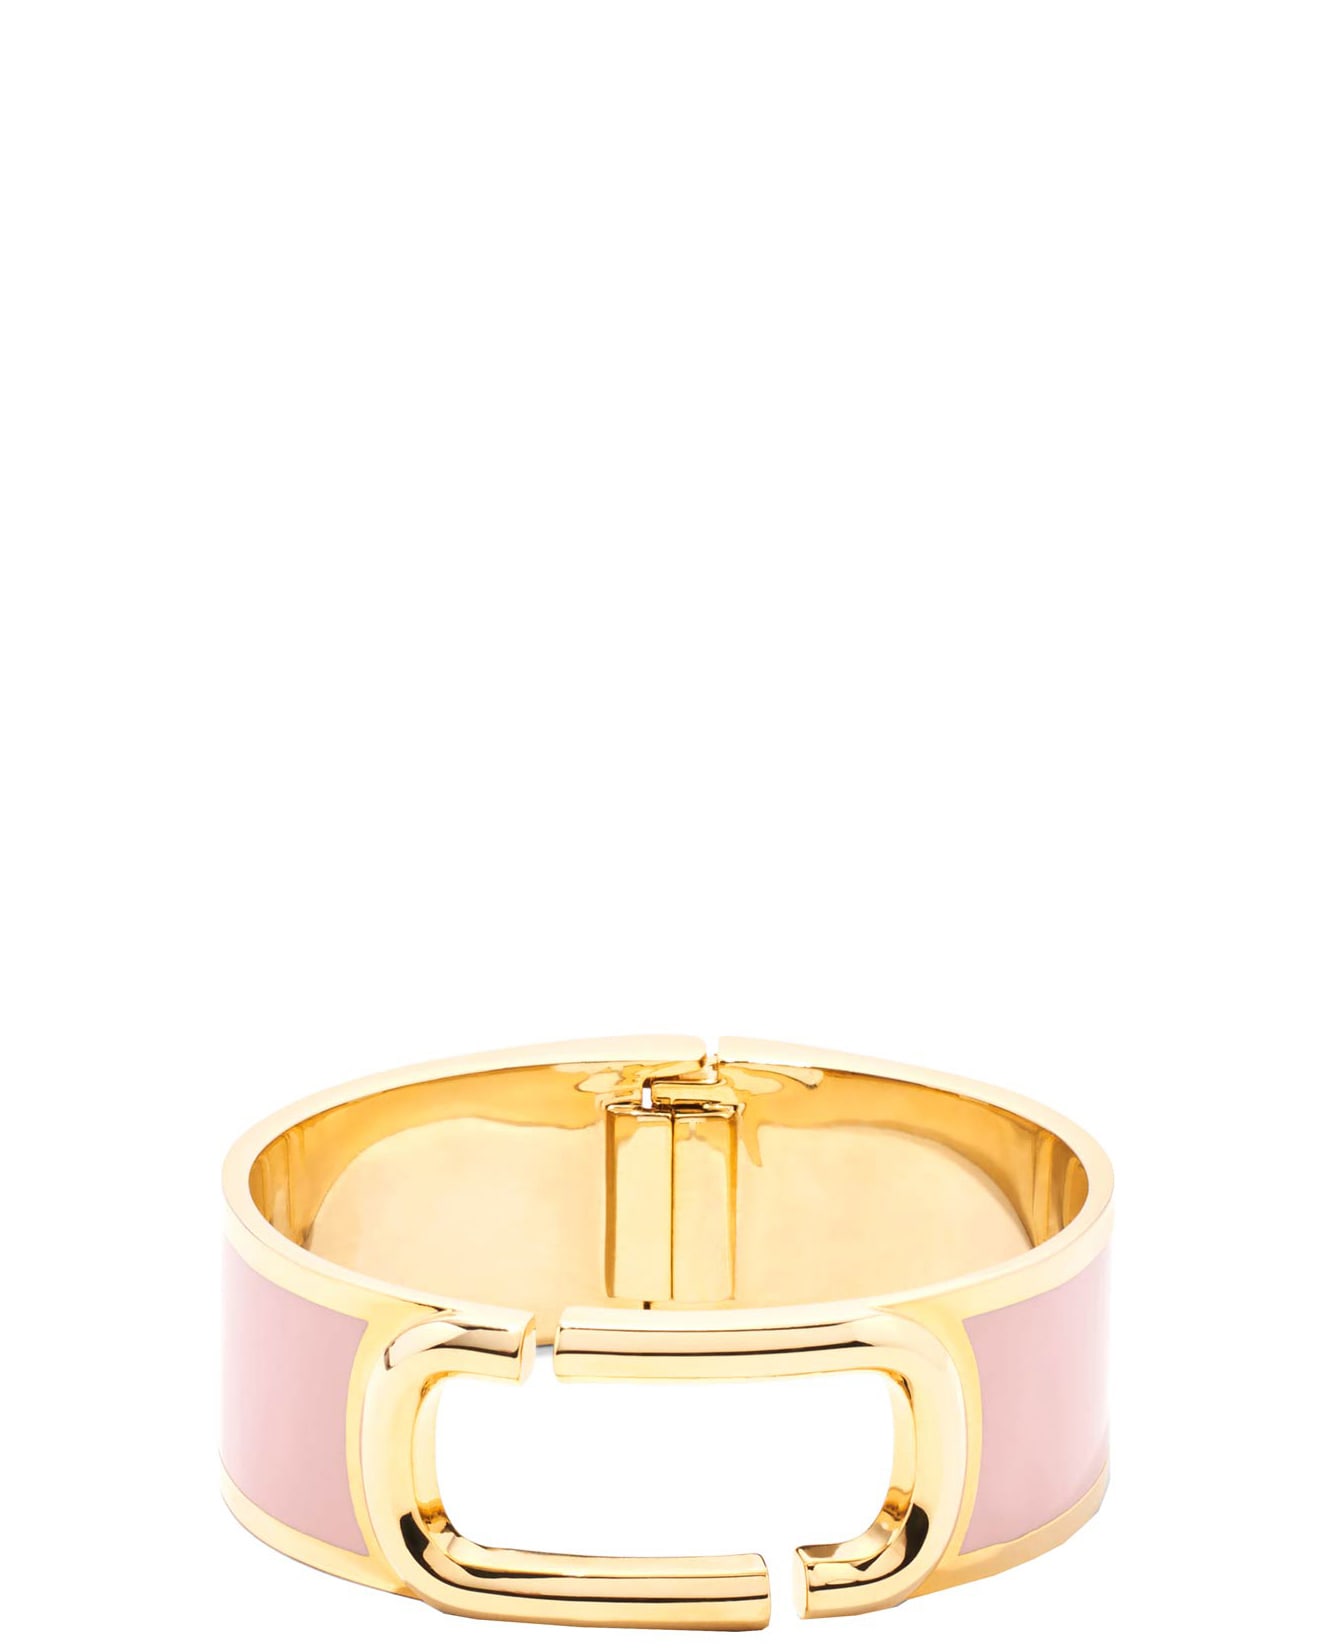 MARC JACOBS MARC JACOBS GOLD AND PINK J MARC LARGE HINGE BANGLE